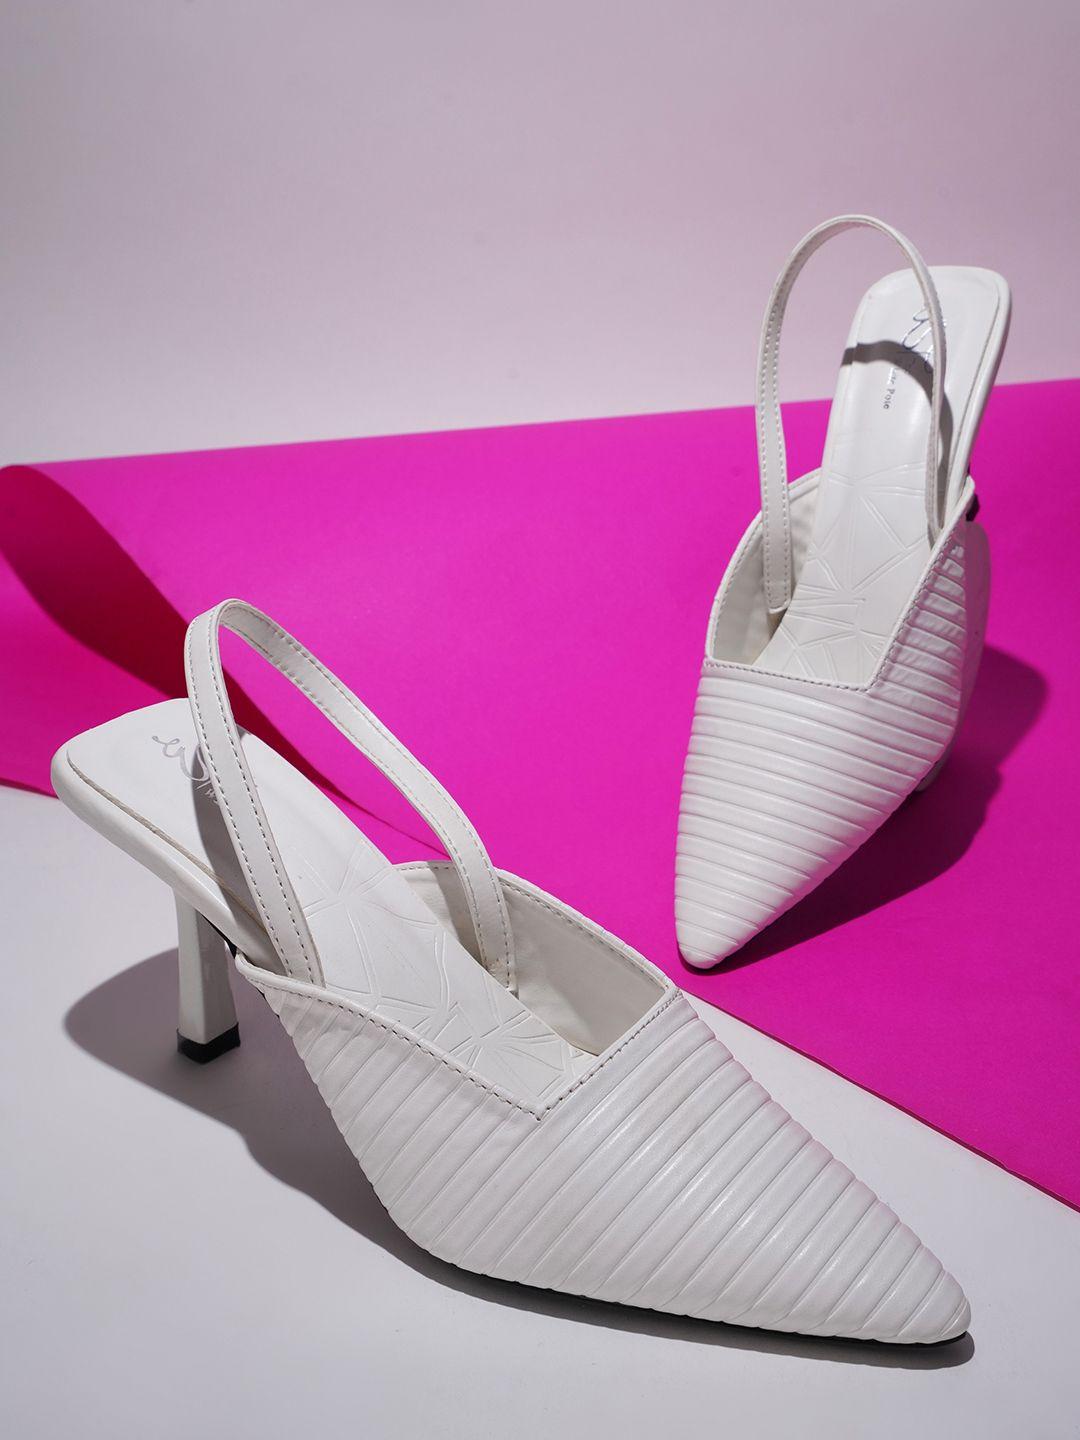 the-white-pole-textured-pointed-toe-stiletto-pumps-with-backstrap